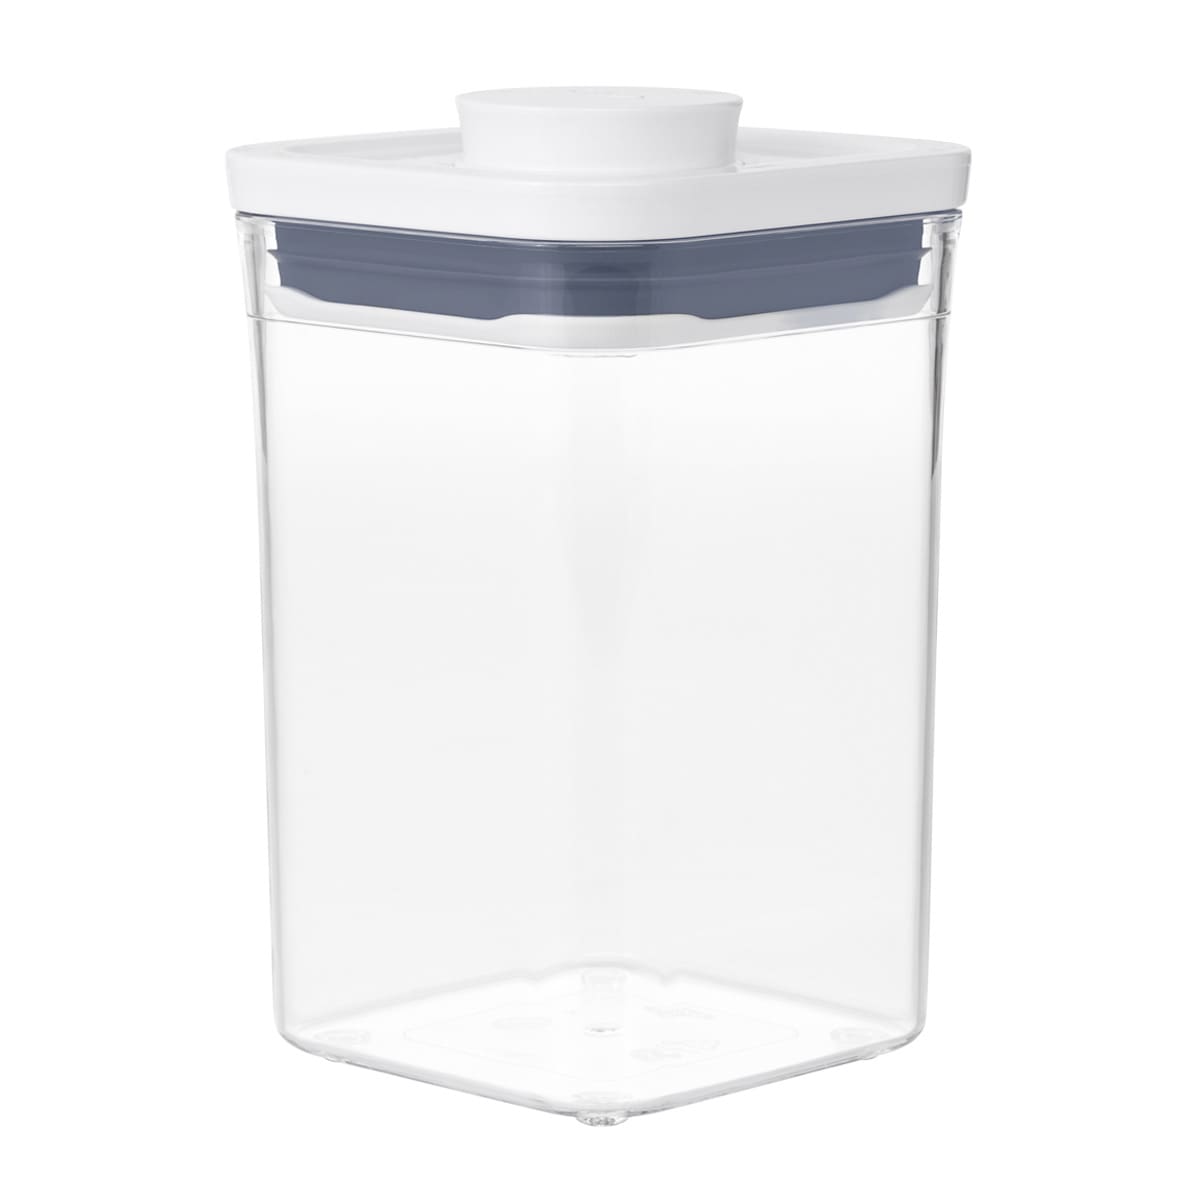 https://cdn.apartmenttherapy.info/image/upload/v1645241653/gen-workflow/product-database/OXO-1.1-qt-POP-Container-Sm.jpg